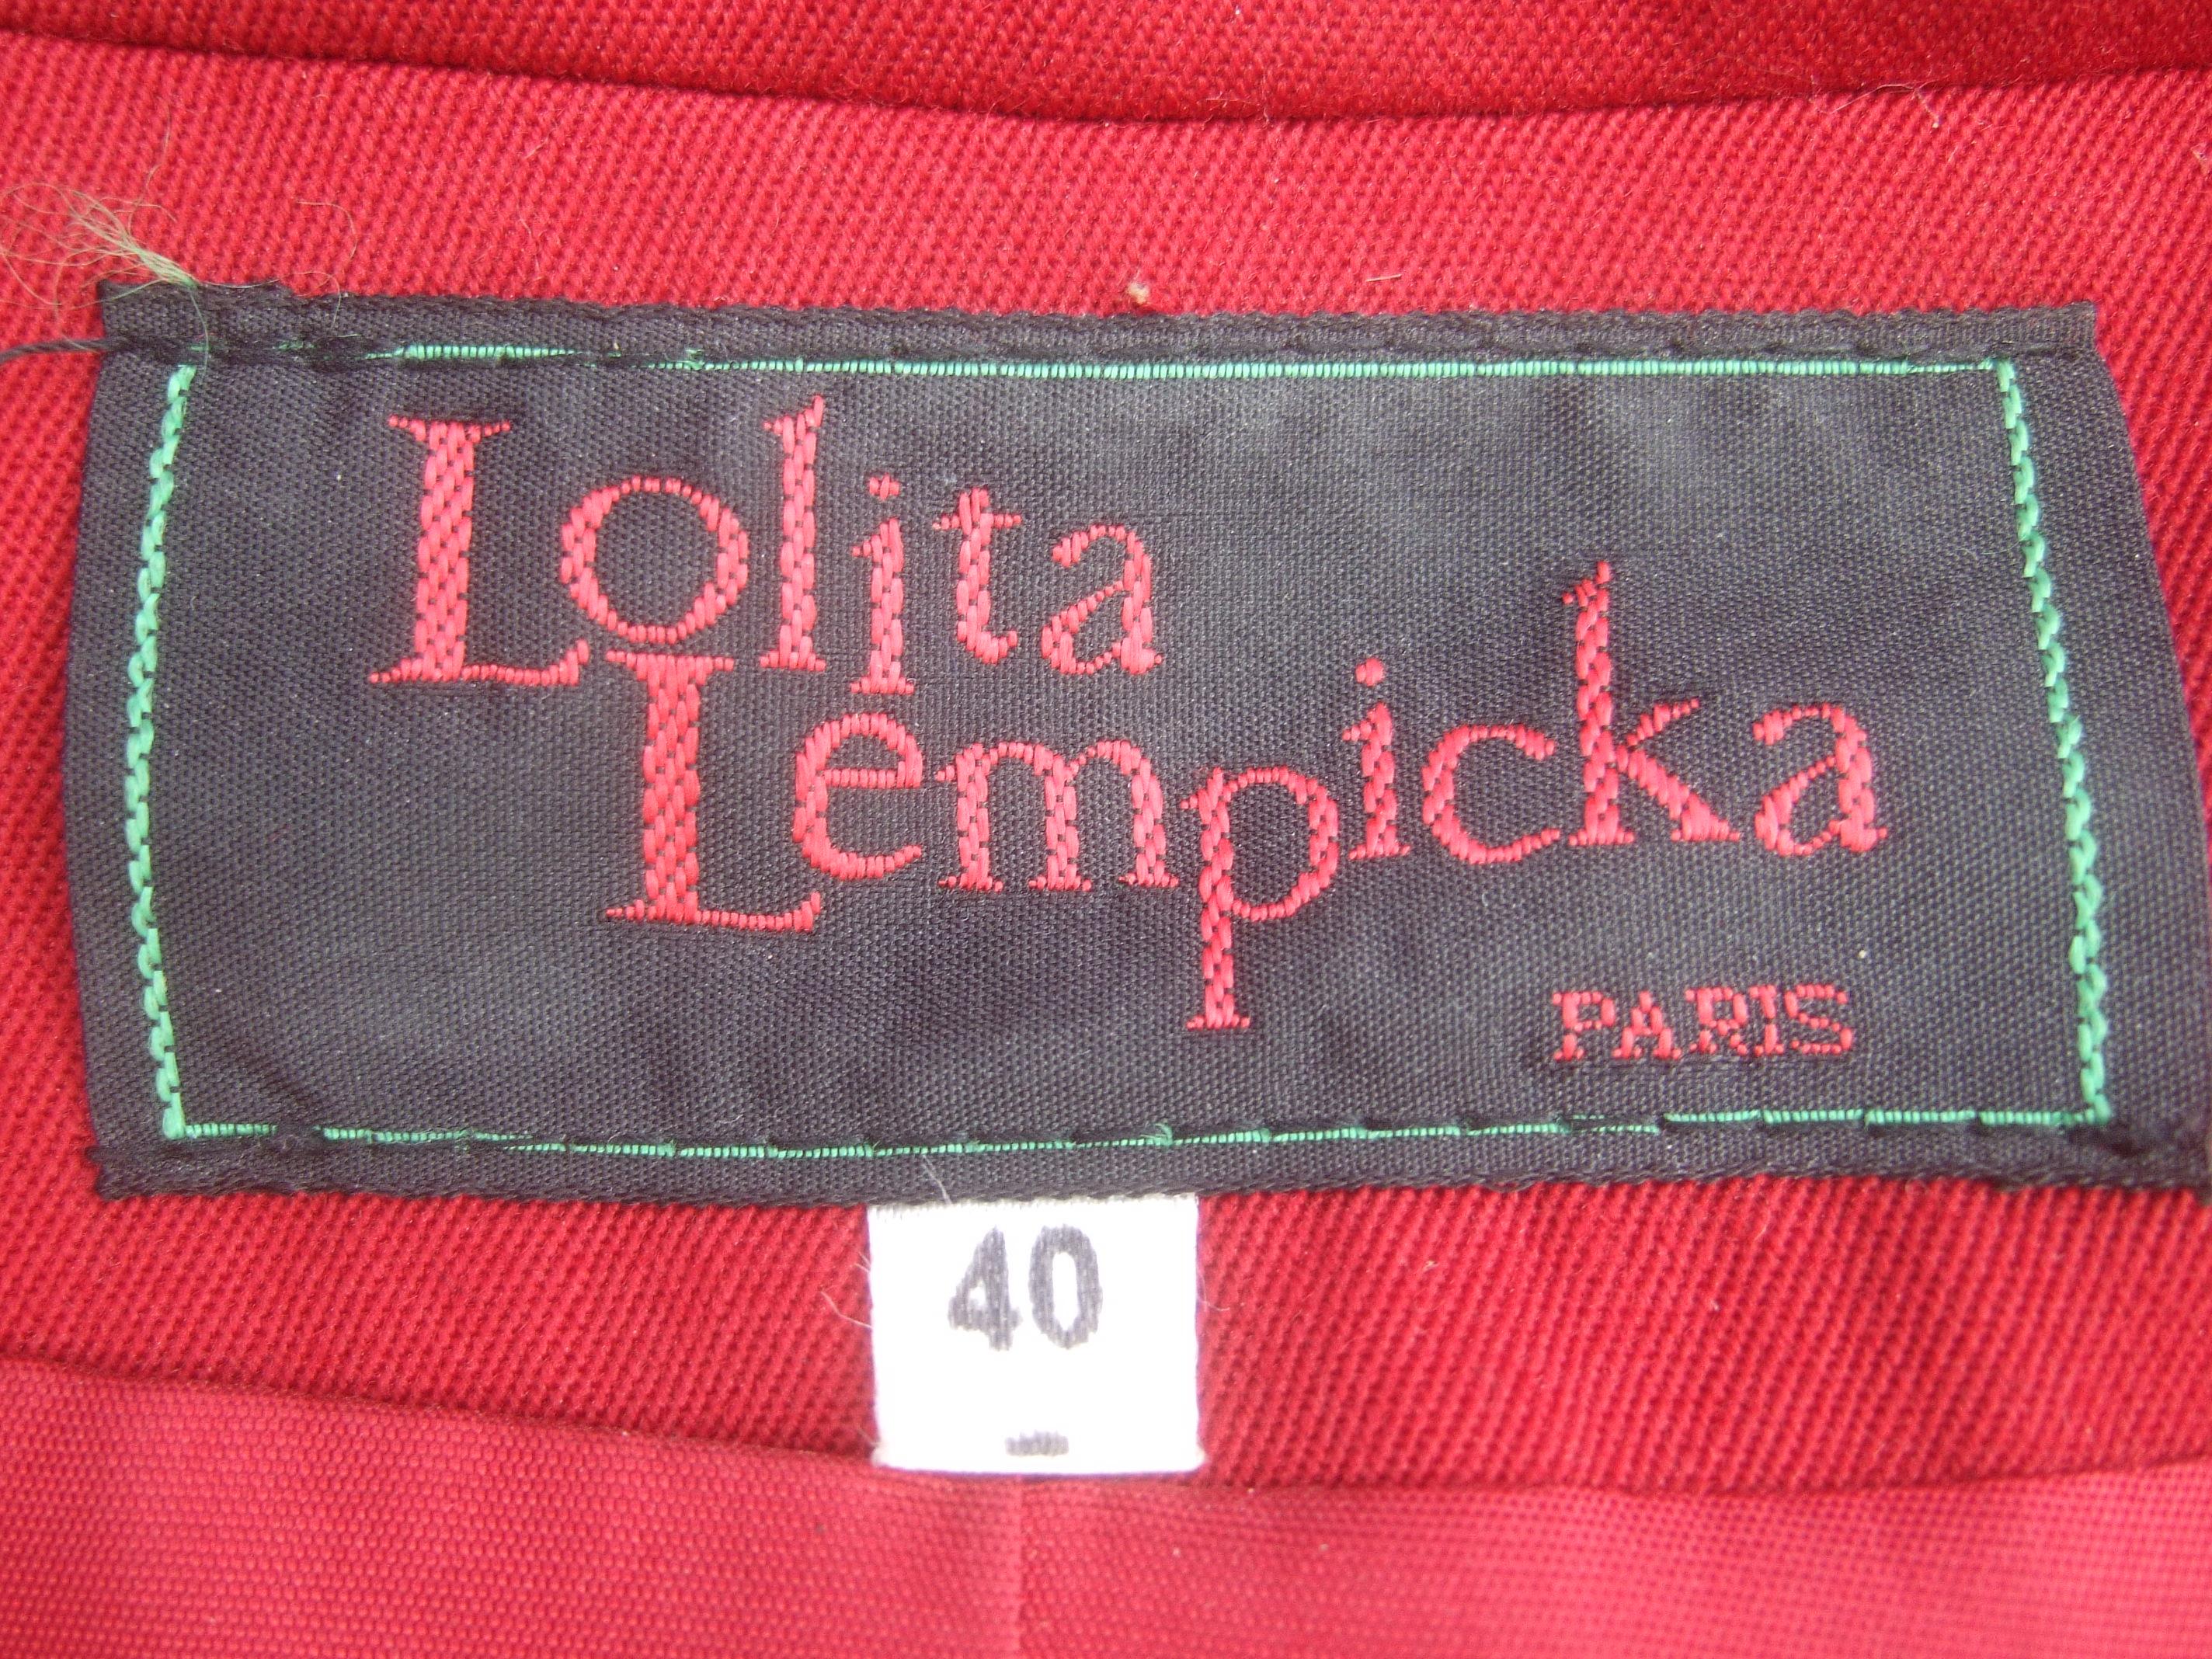 Lolita Lempicka Paris Red Wool Face Button Double-Breasted Blazer c 1980s For Sale 9